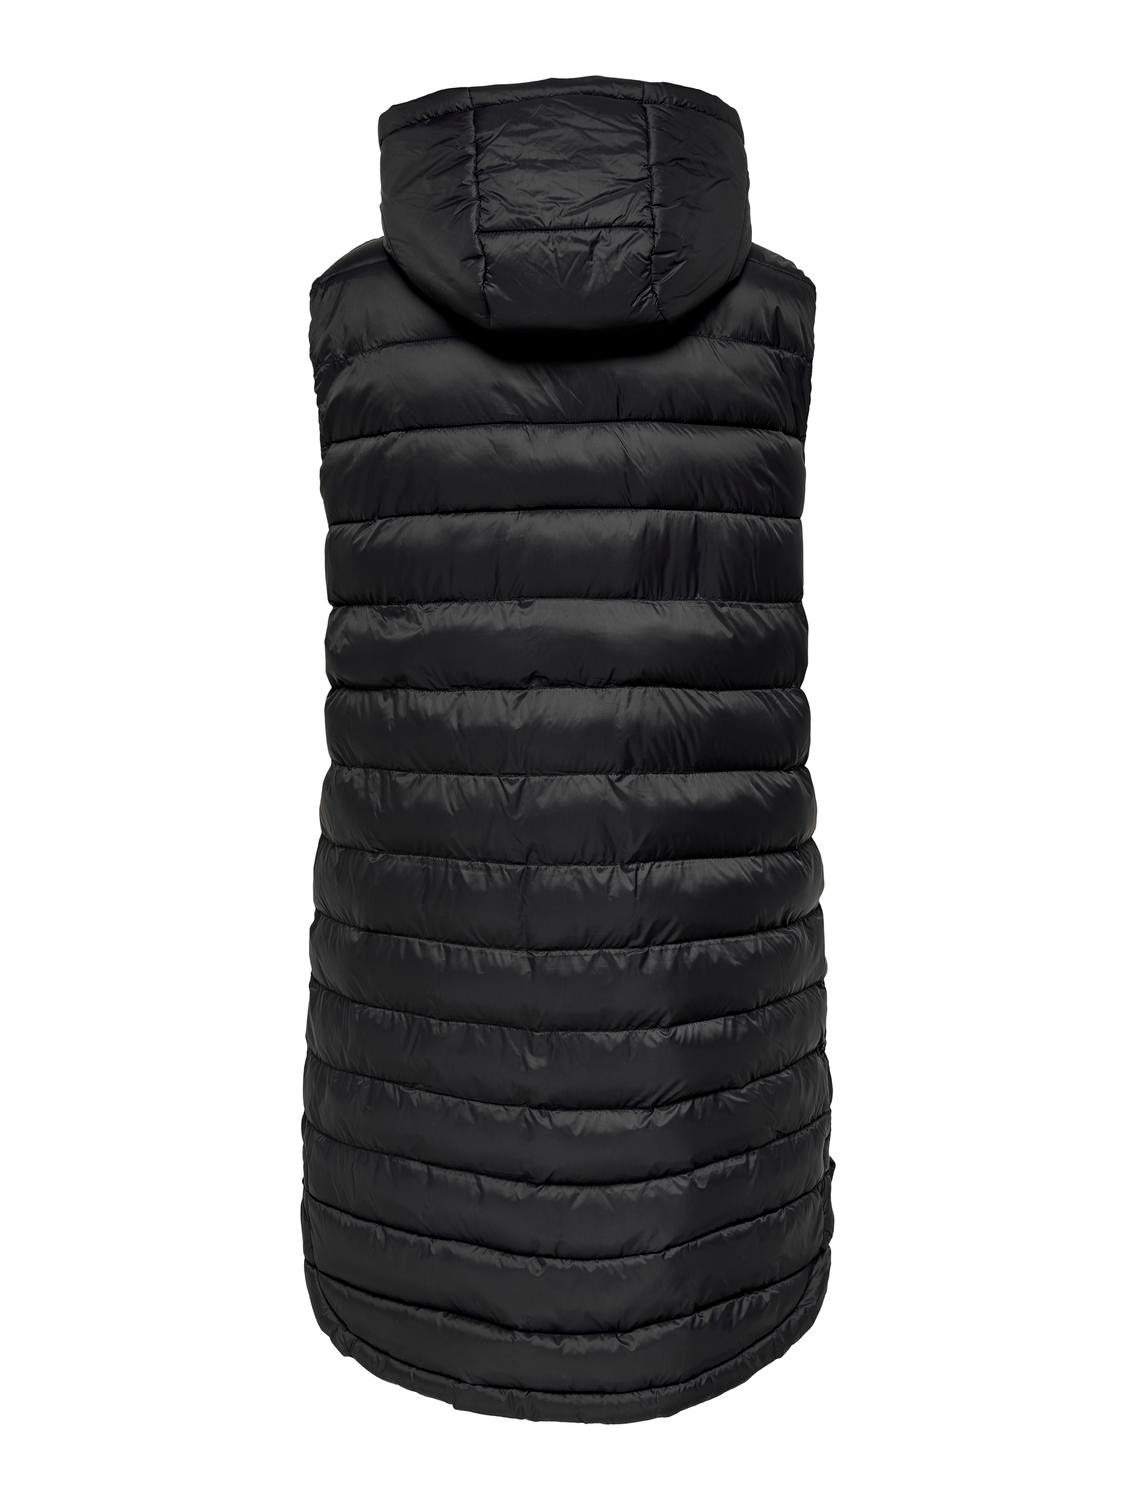 ONLY Long gilet with hood -Black - 15258350